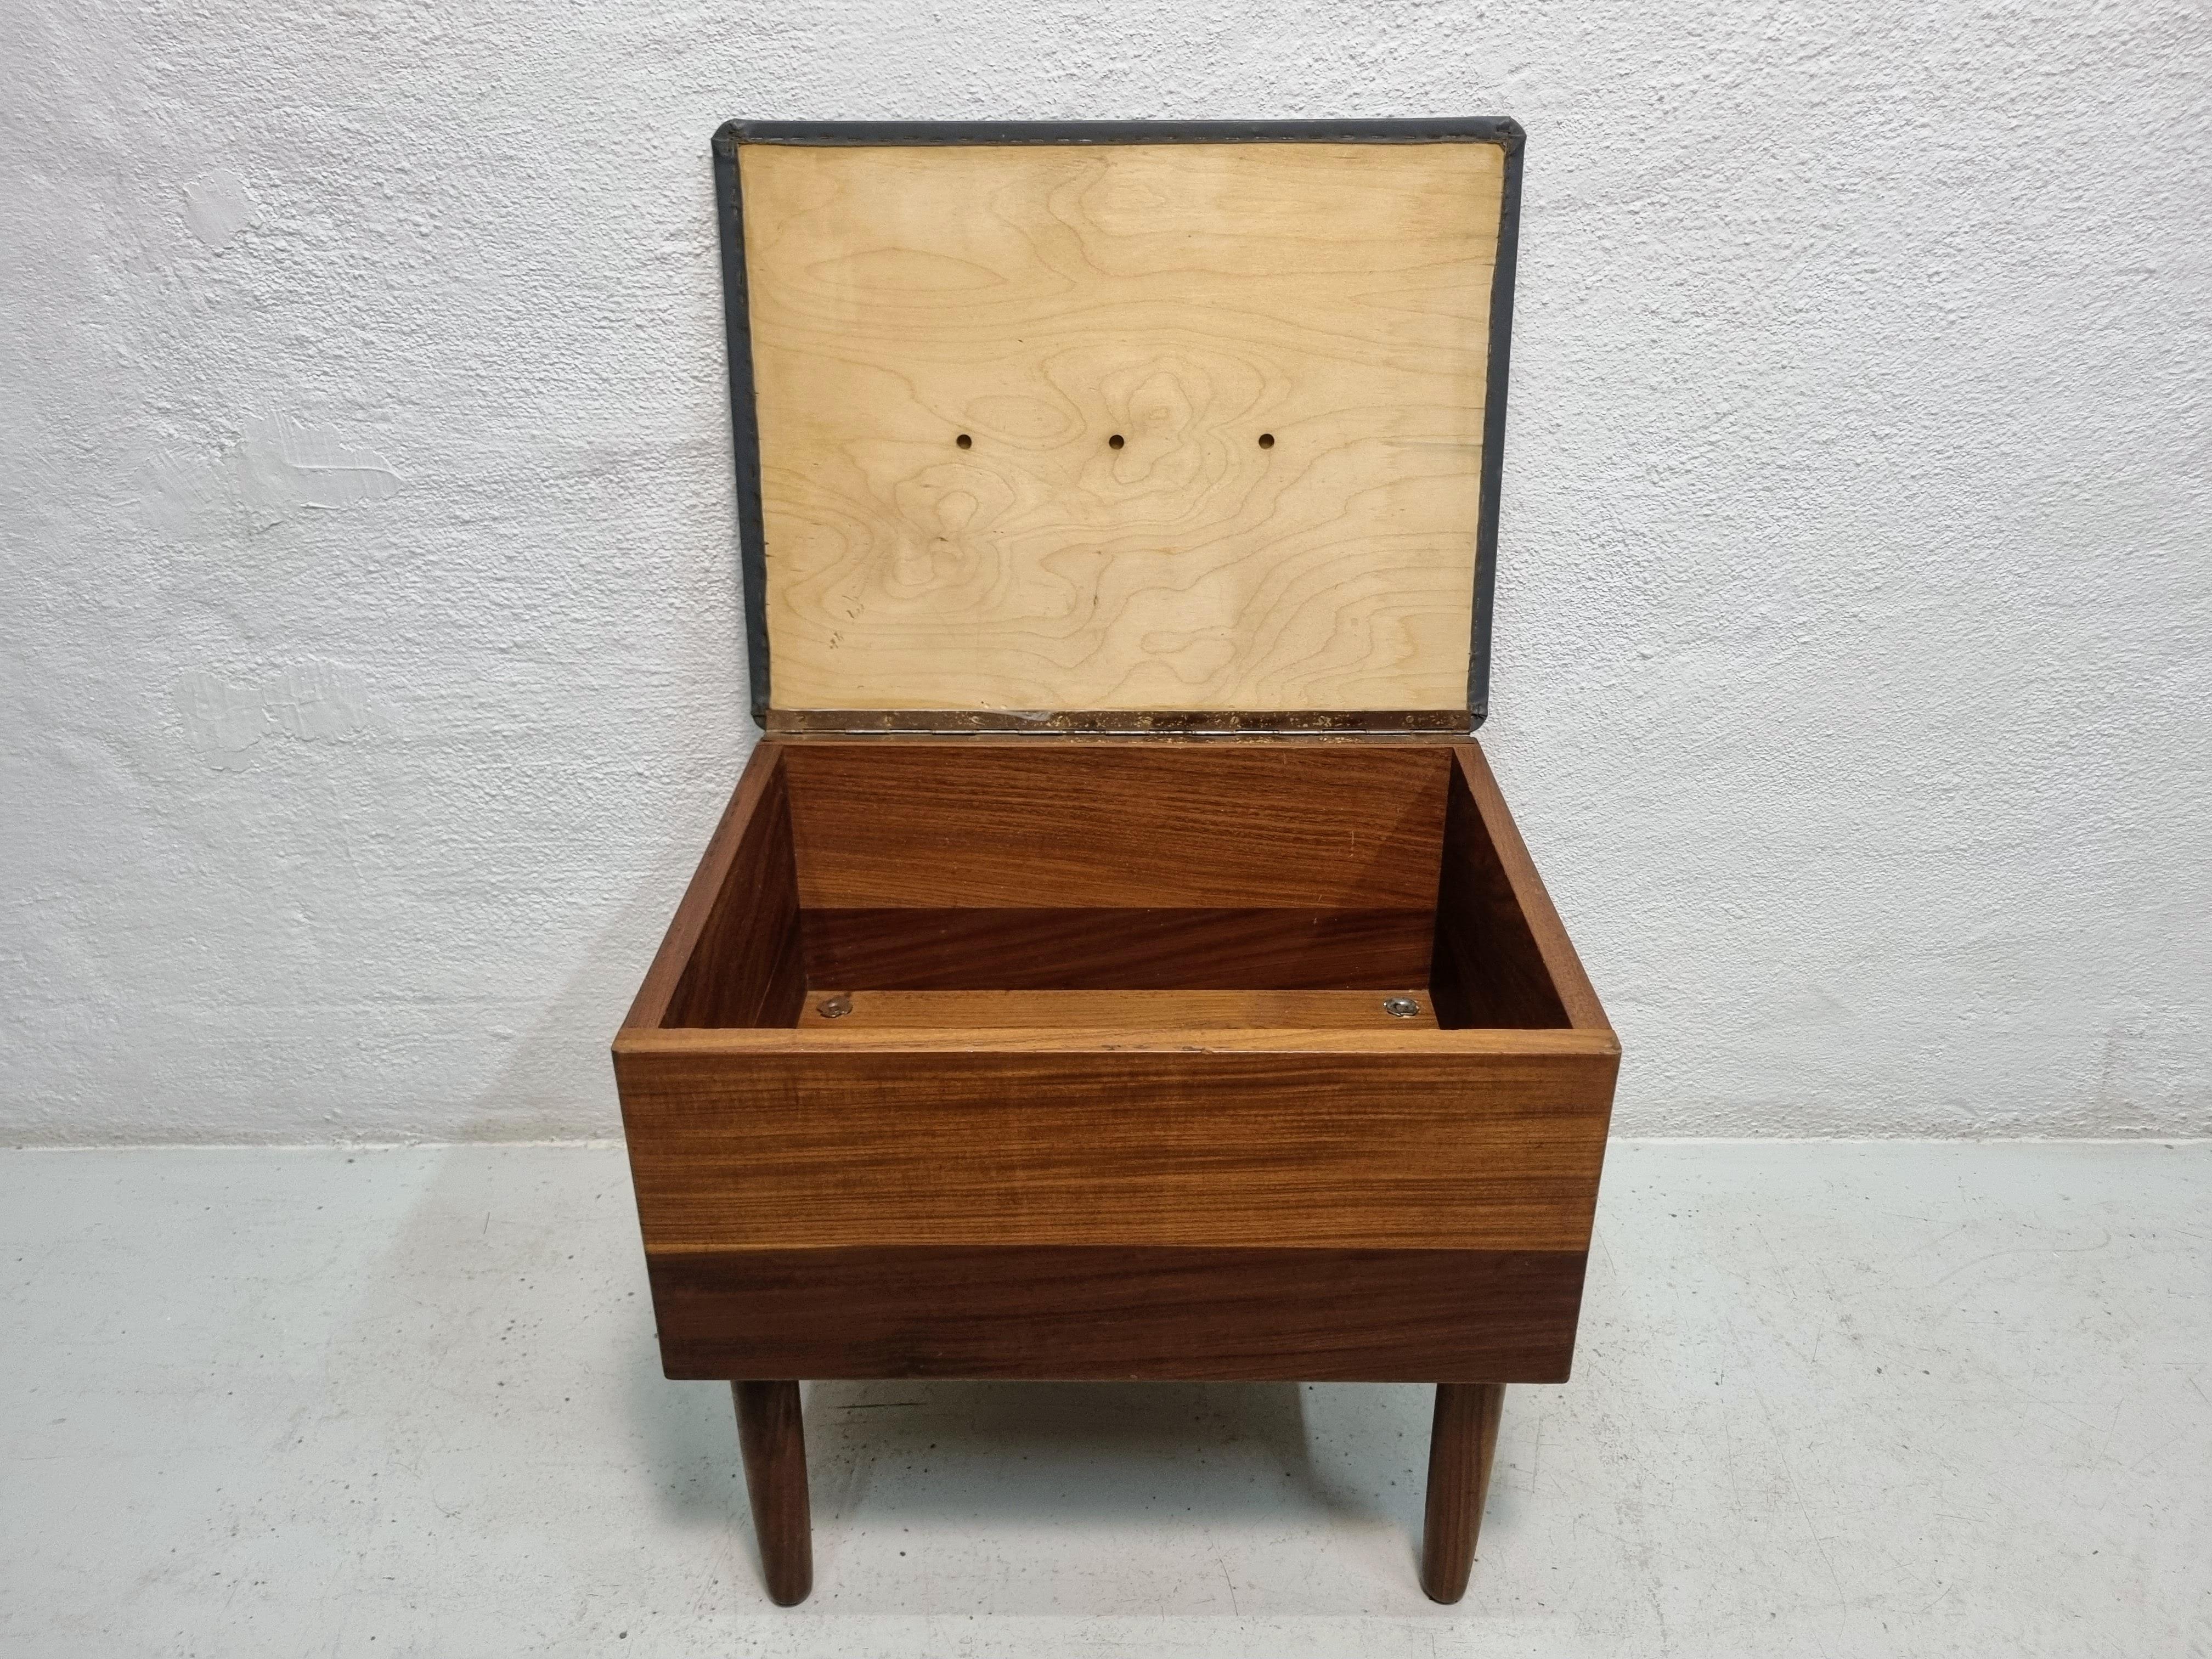 Teak stool with storage compartment For Sale 1